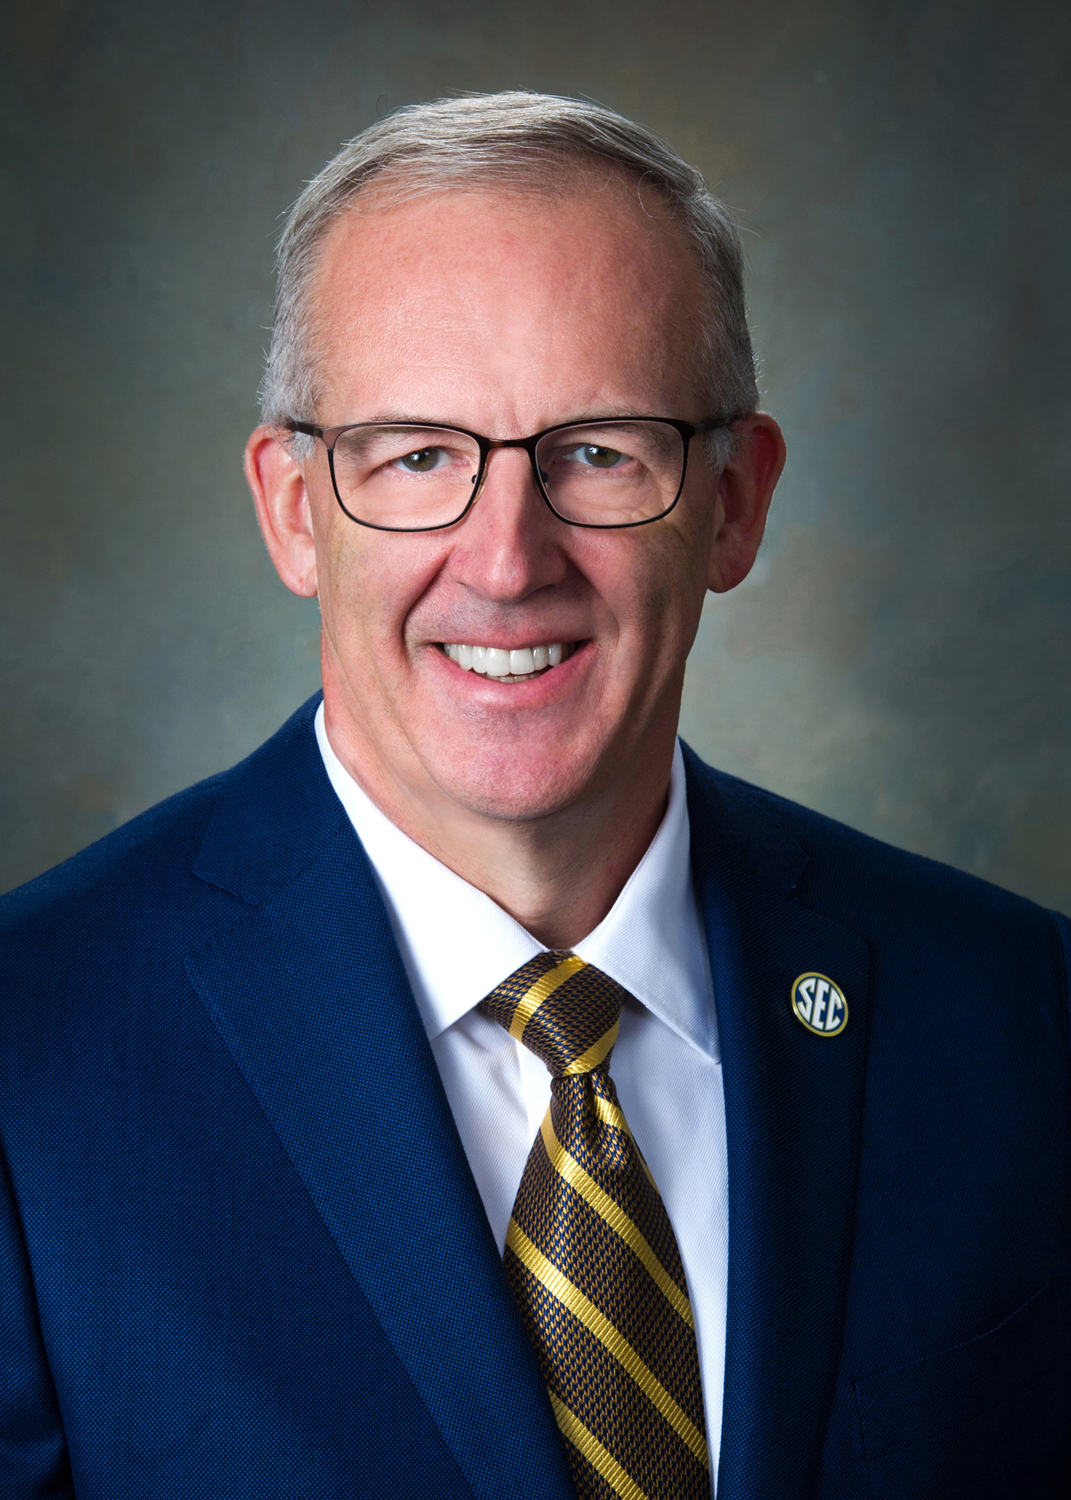 Voices of Our Times: Greg Sankey